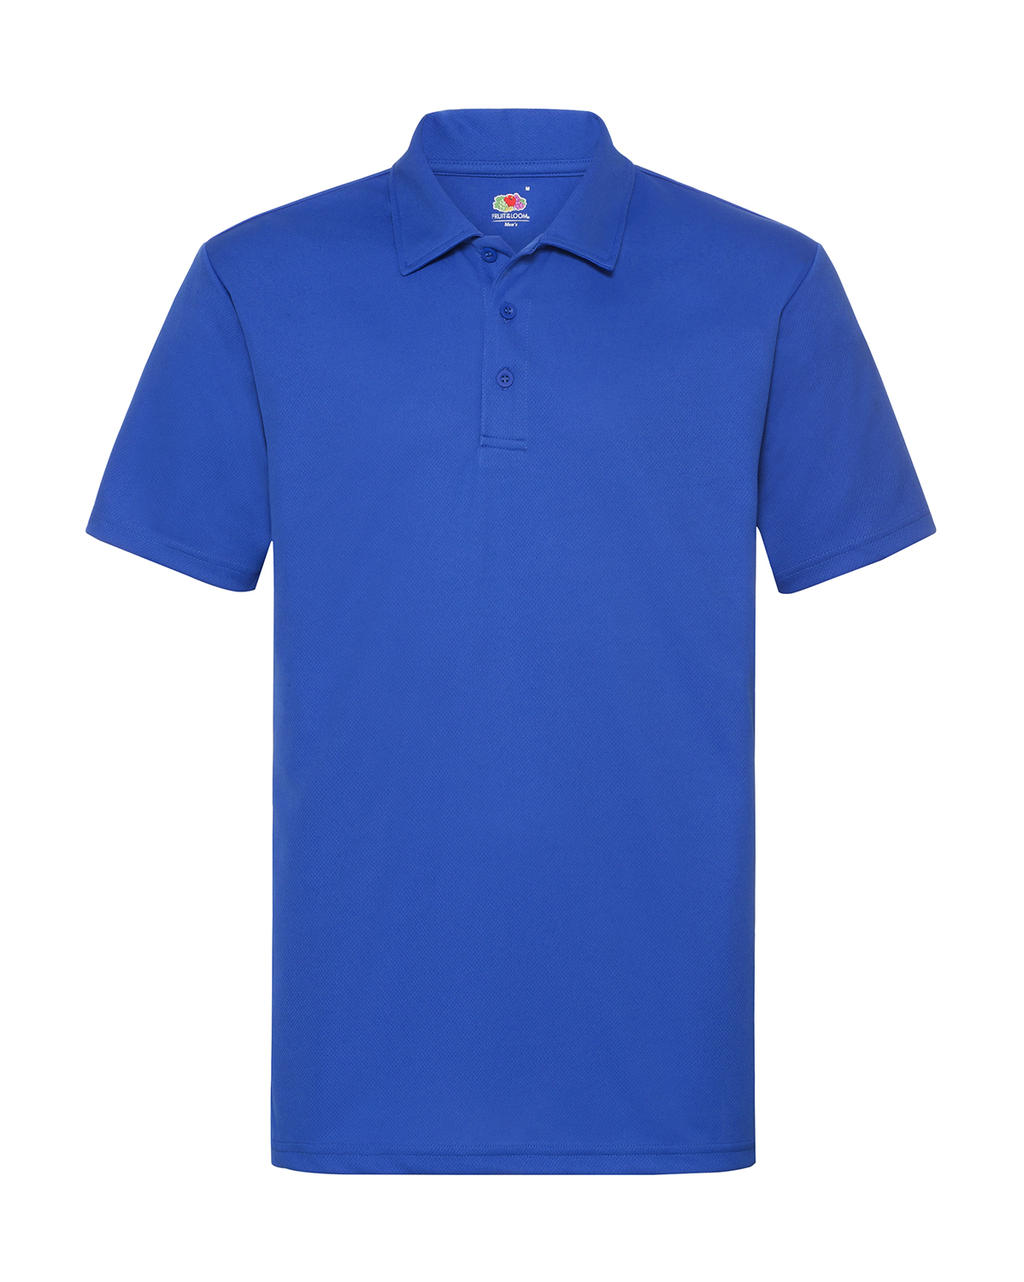  Performance Polo in Farbe Royal